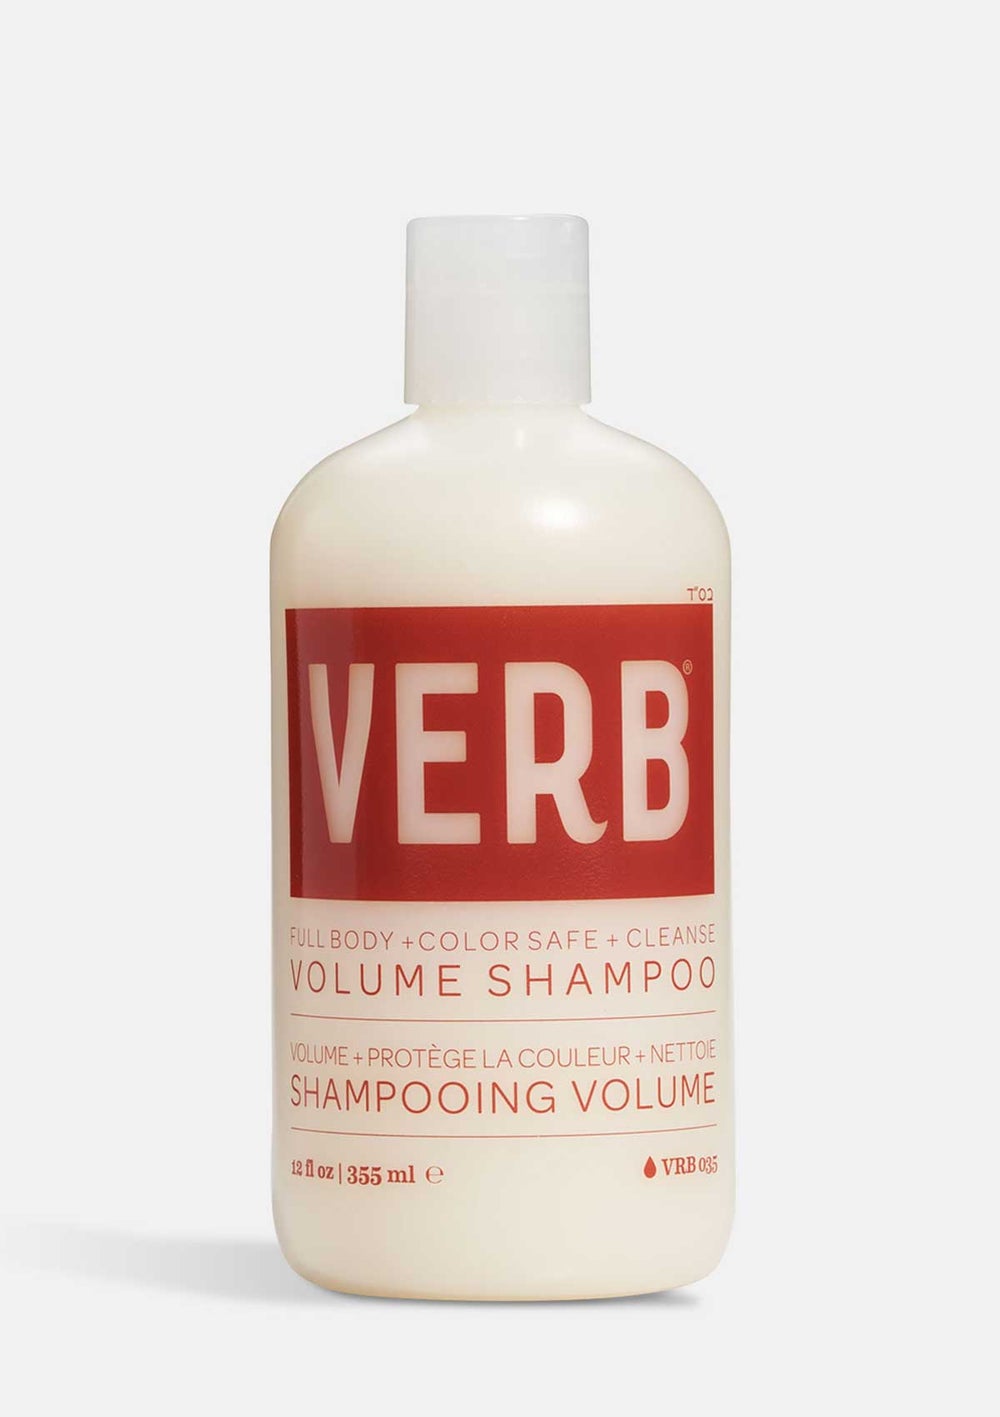 Verb - Volume Shampoo Full Body + Color Safe + Cleanse |12 oz| - by Verb |ProCare Outlet|